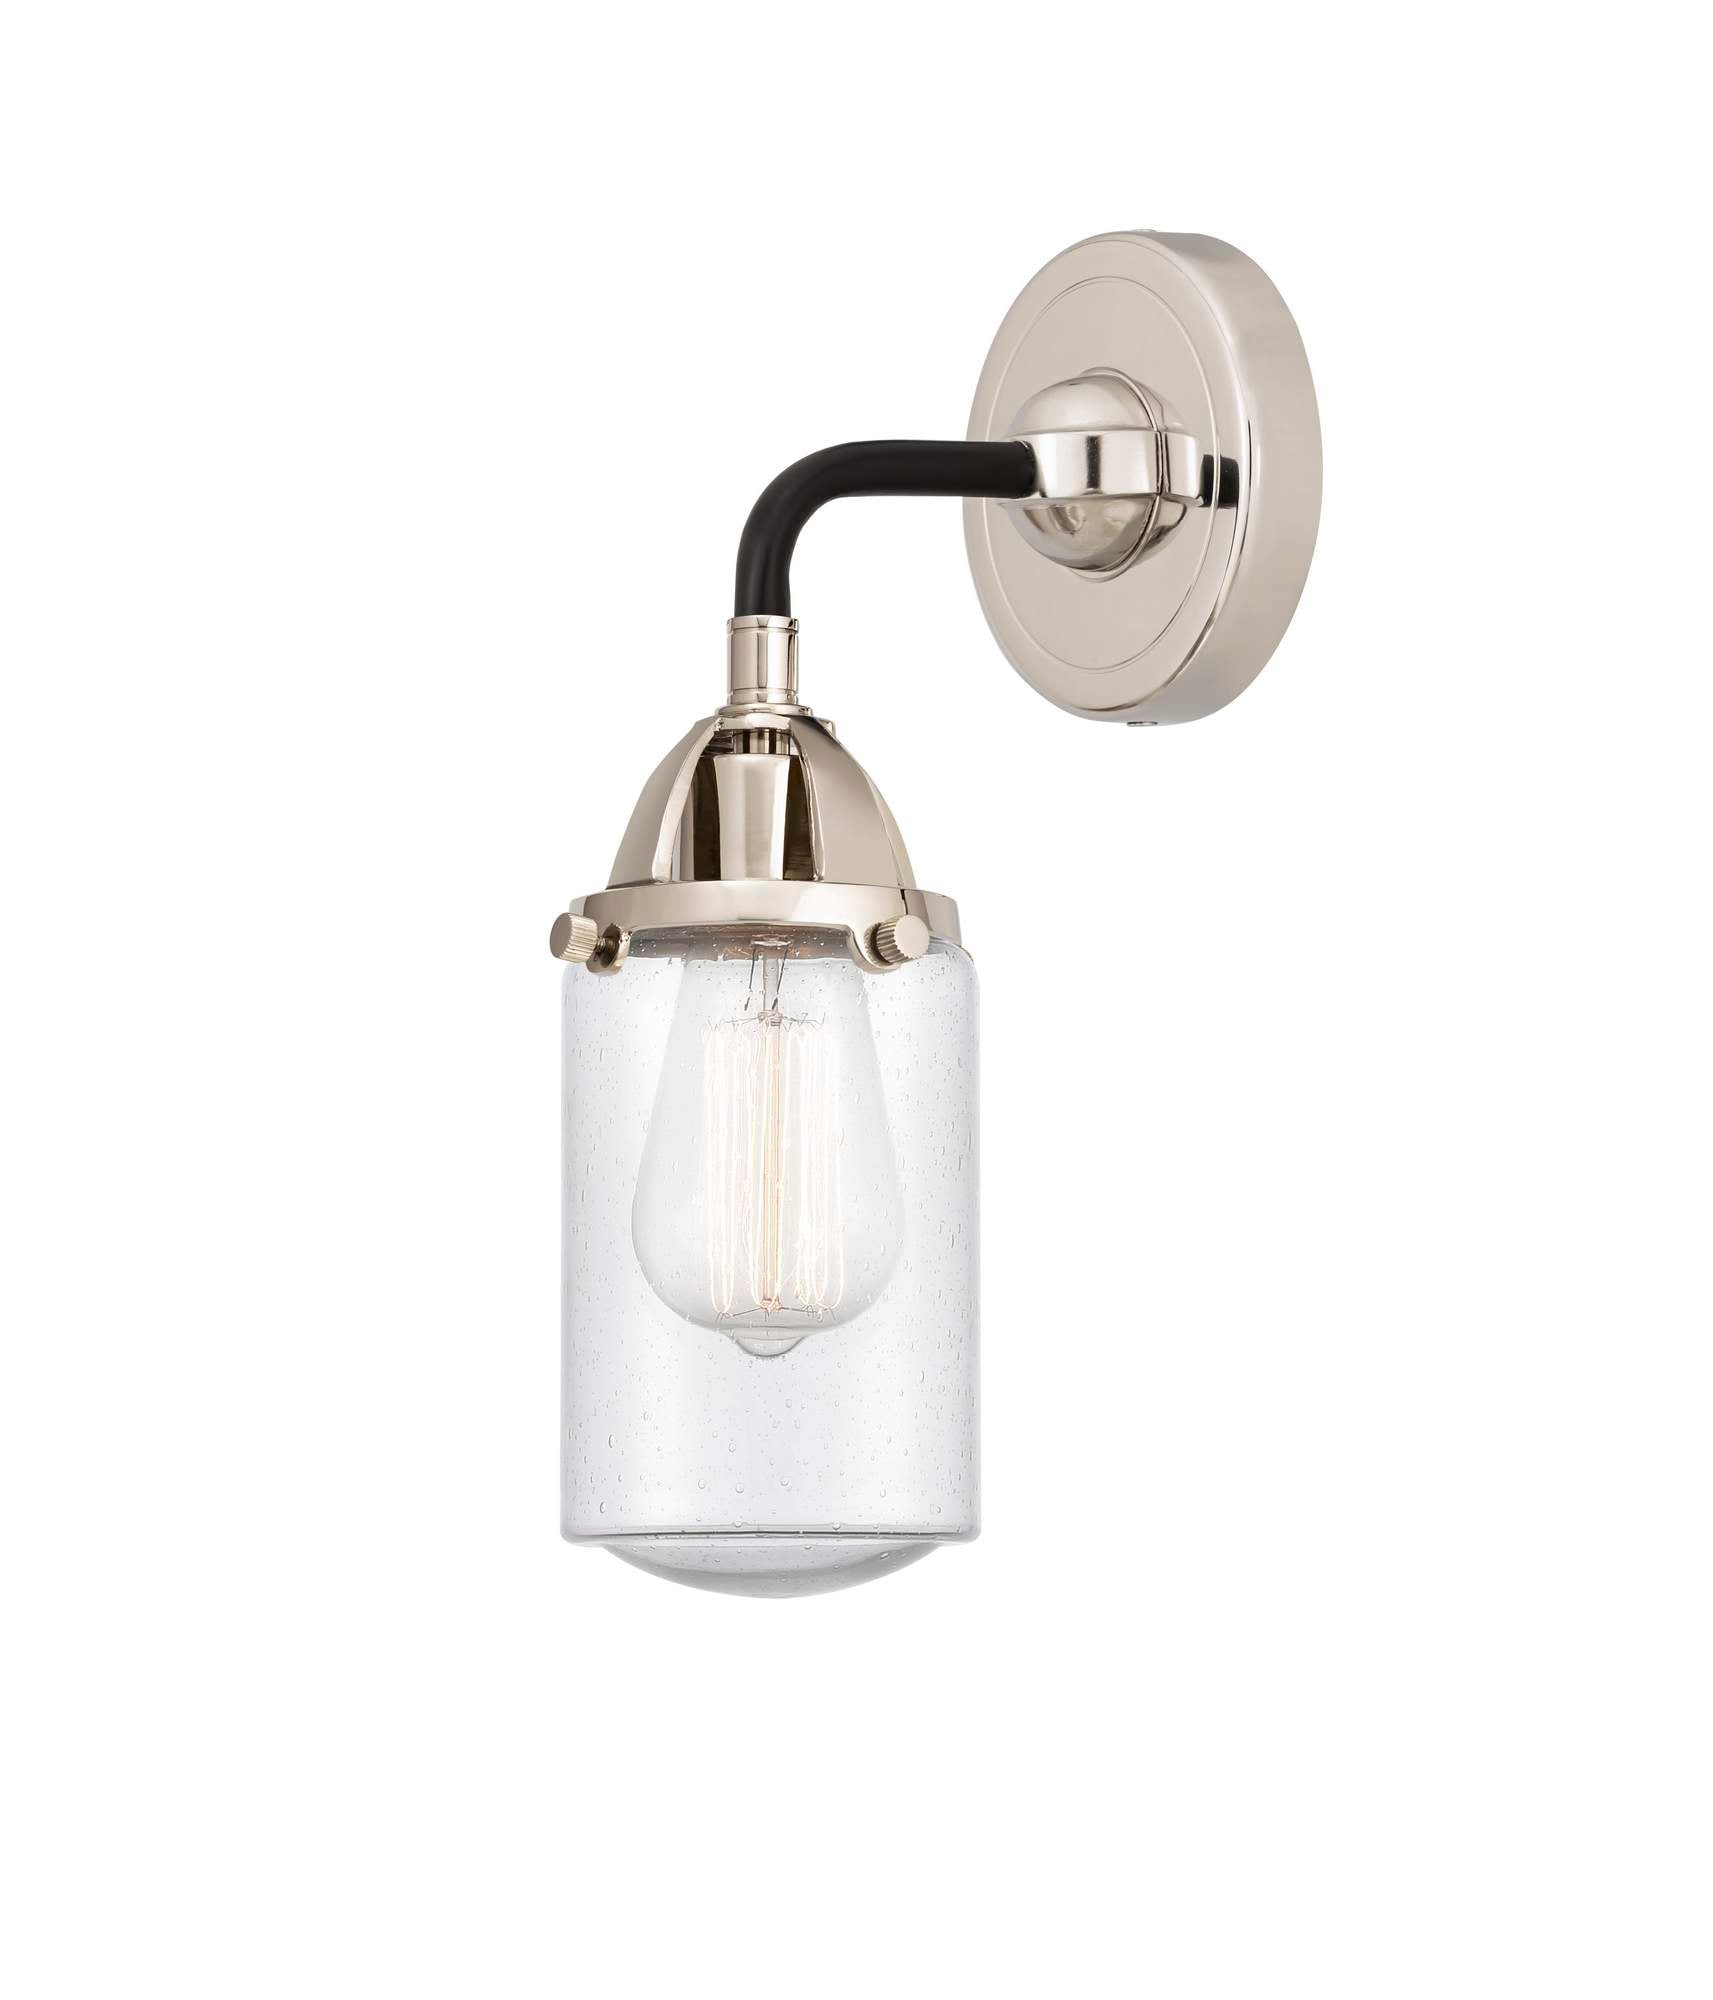 288-1W-BPN-G314 1-Light 4.5" Black Polished Nickel Sconce - Seedy Dover Glass - LED Bulb - Dimmensions: 4.5 x 6.5 x 10.875 - Glass Up or Down: Yes